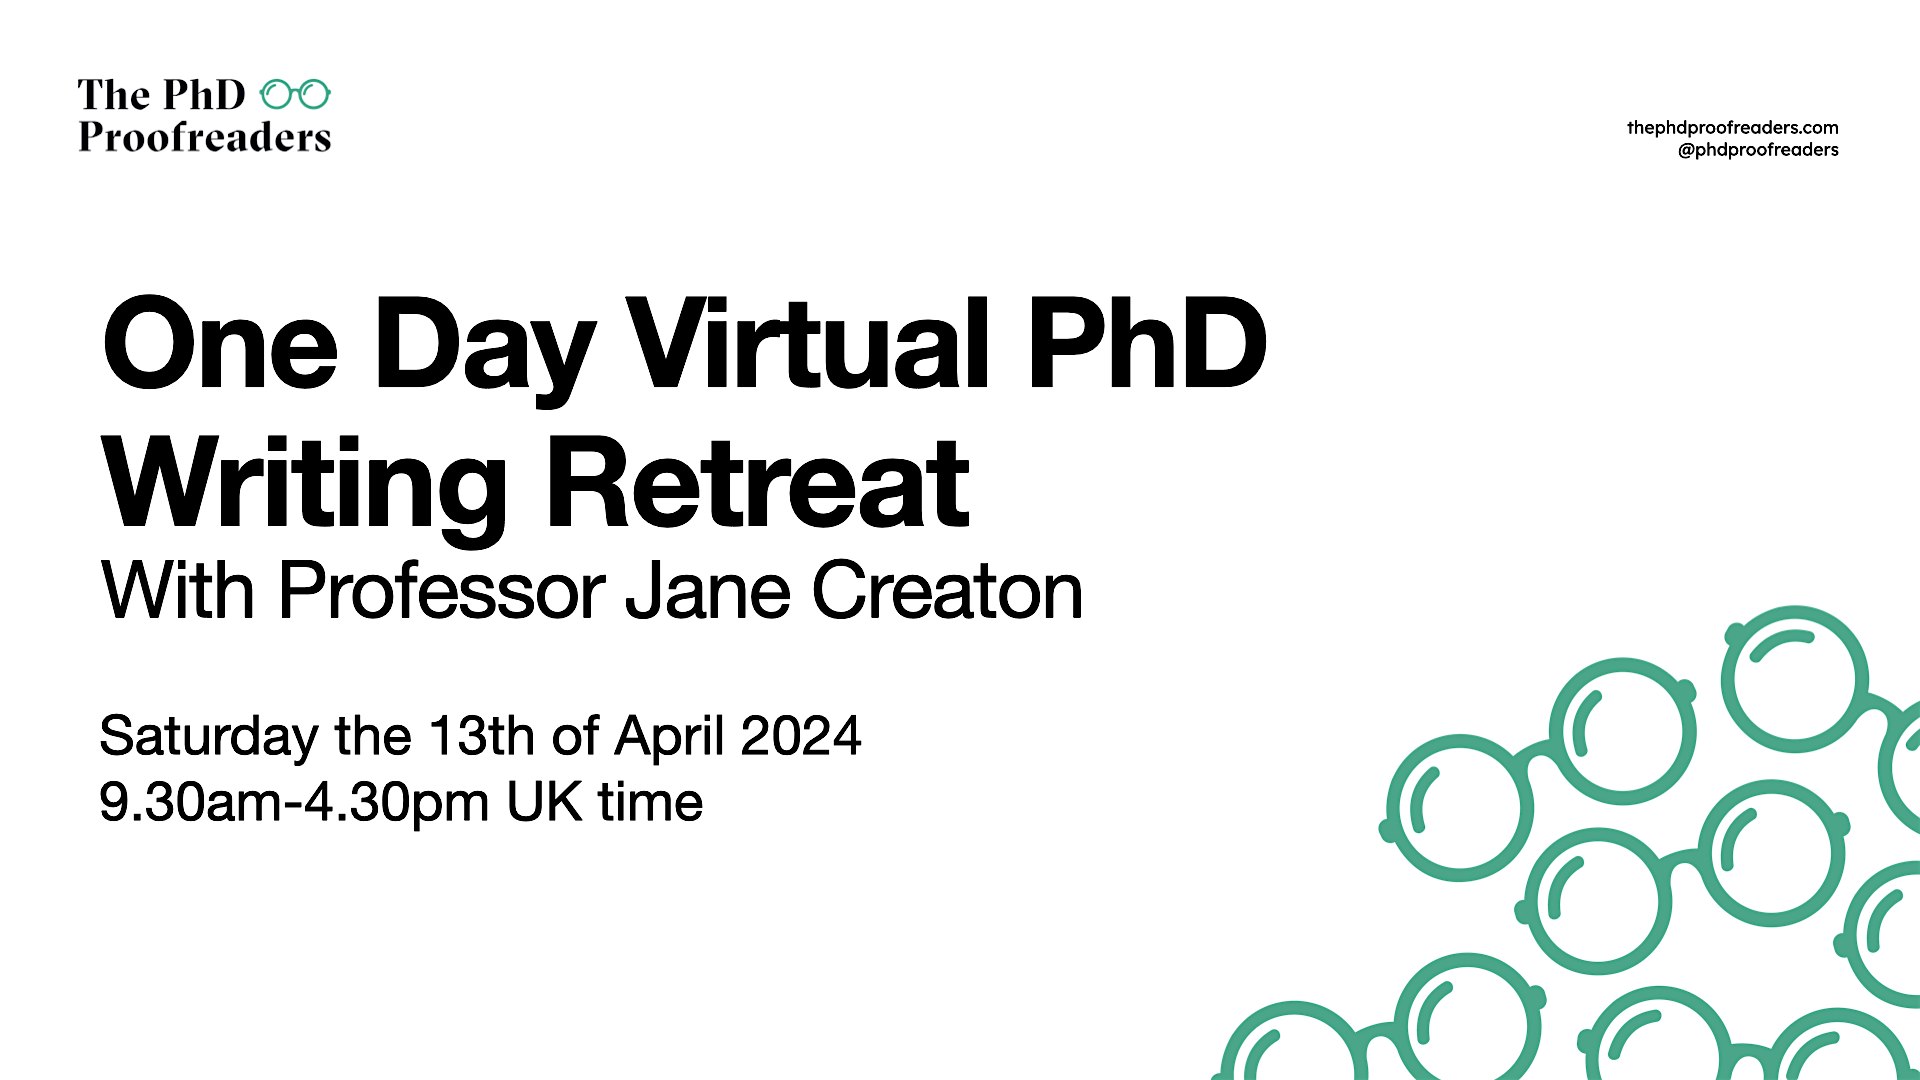 One Day PhD Writing Retreat – Get Your Writing Done